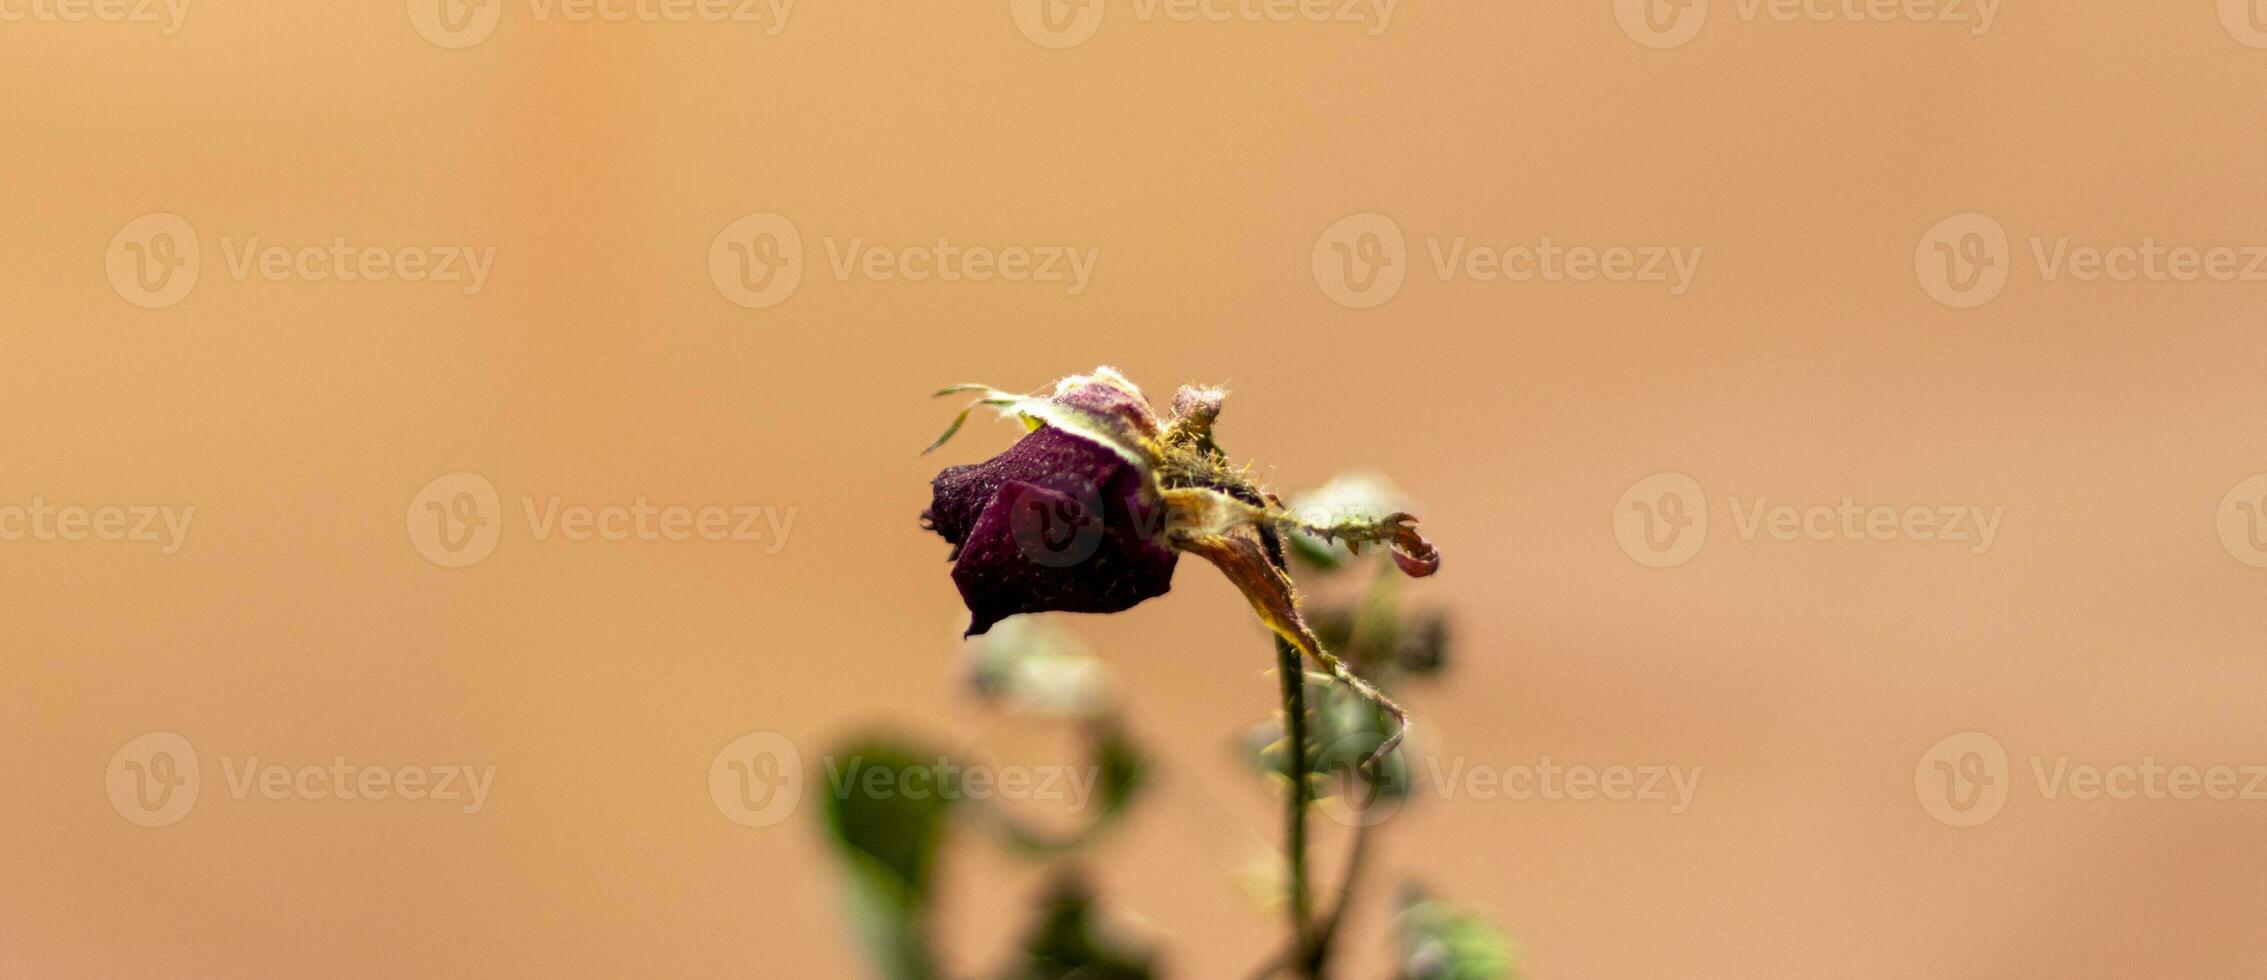 Concept shot of the background theme, wrapping paper, dried roses other flowers and other arrangements. Love photo